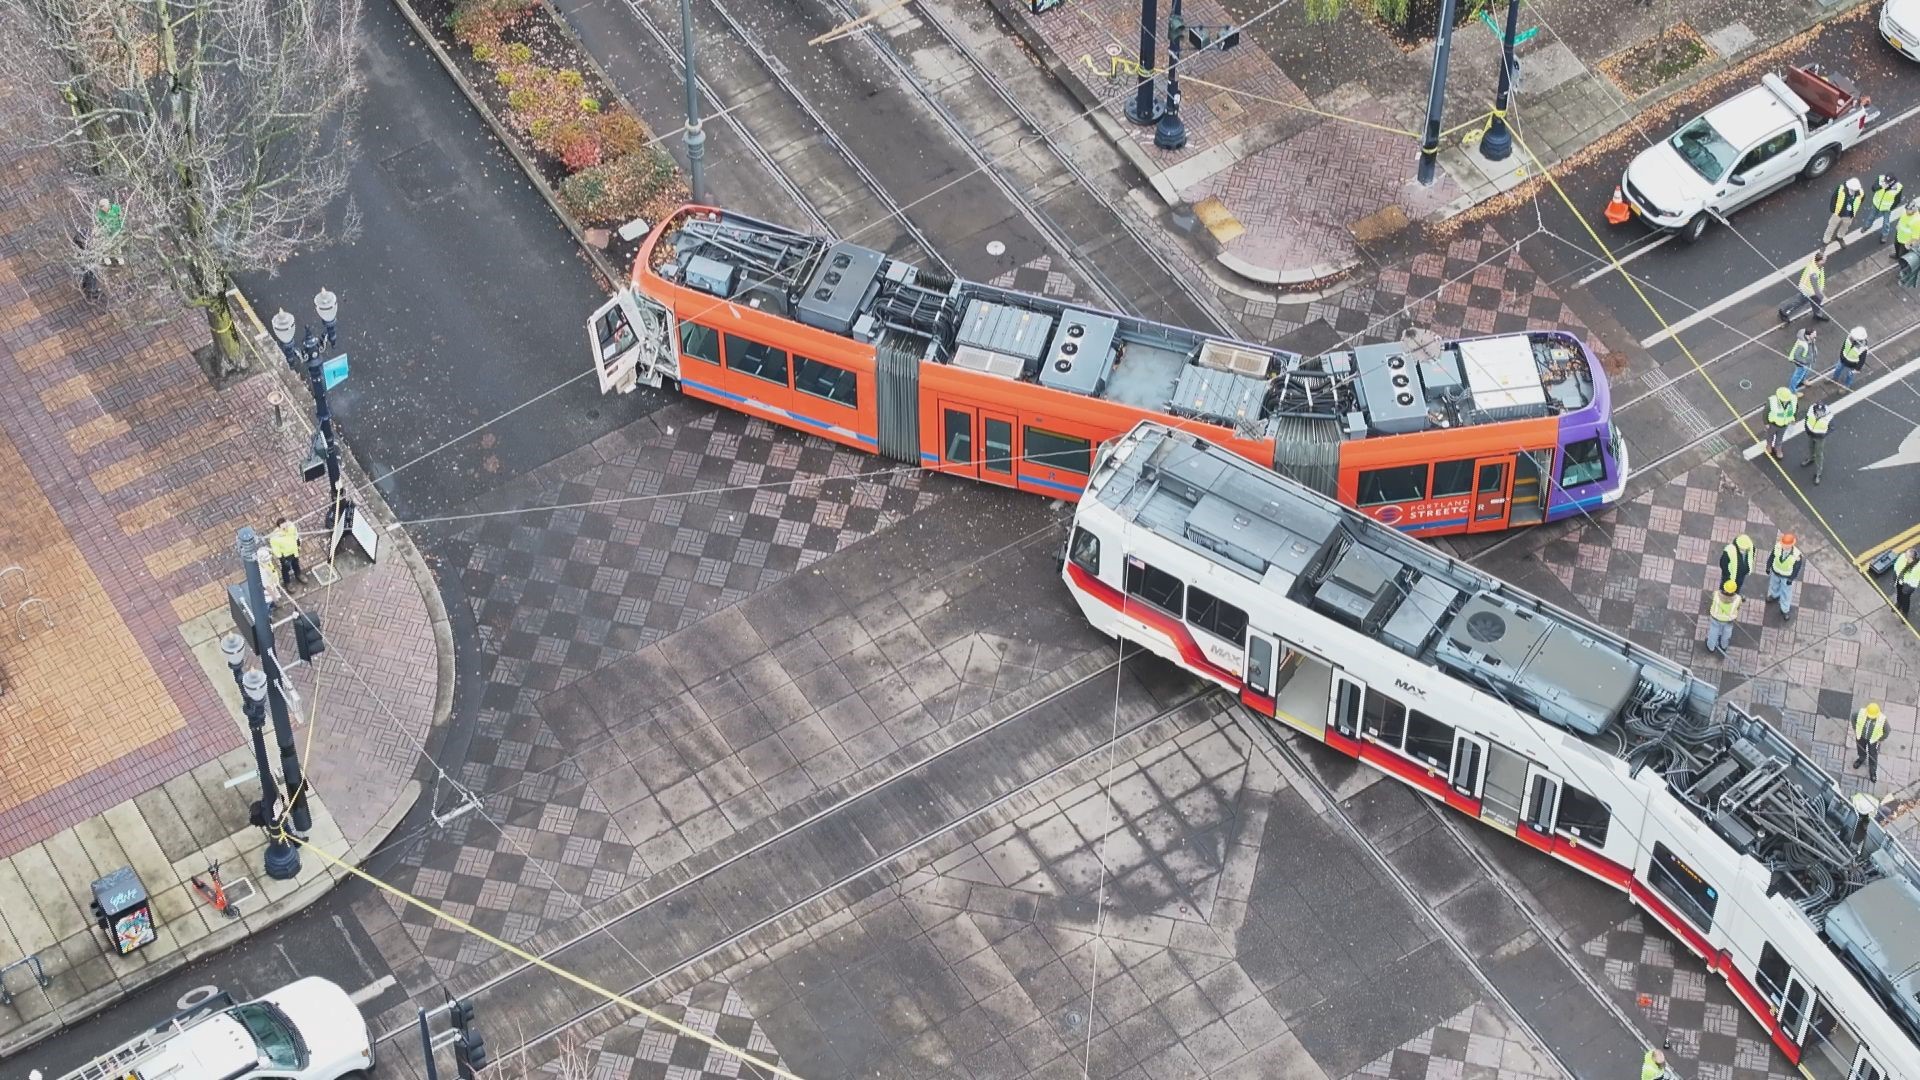 Two people, the operator and a passenger on the streetcar, were taken to the hospital with minor injuries, according to Portland Fire.